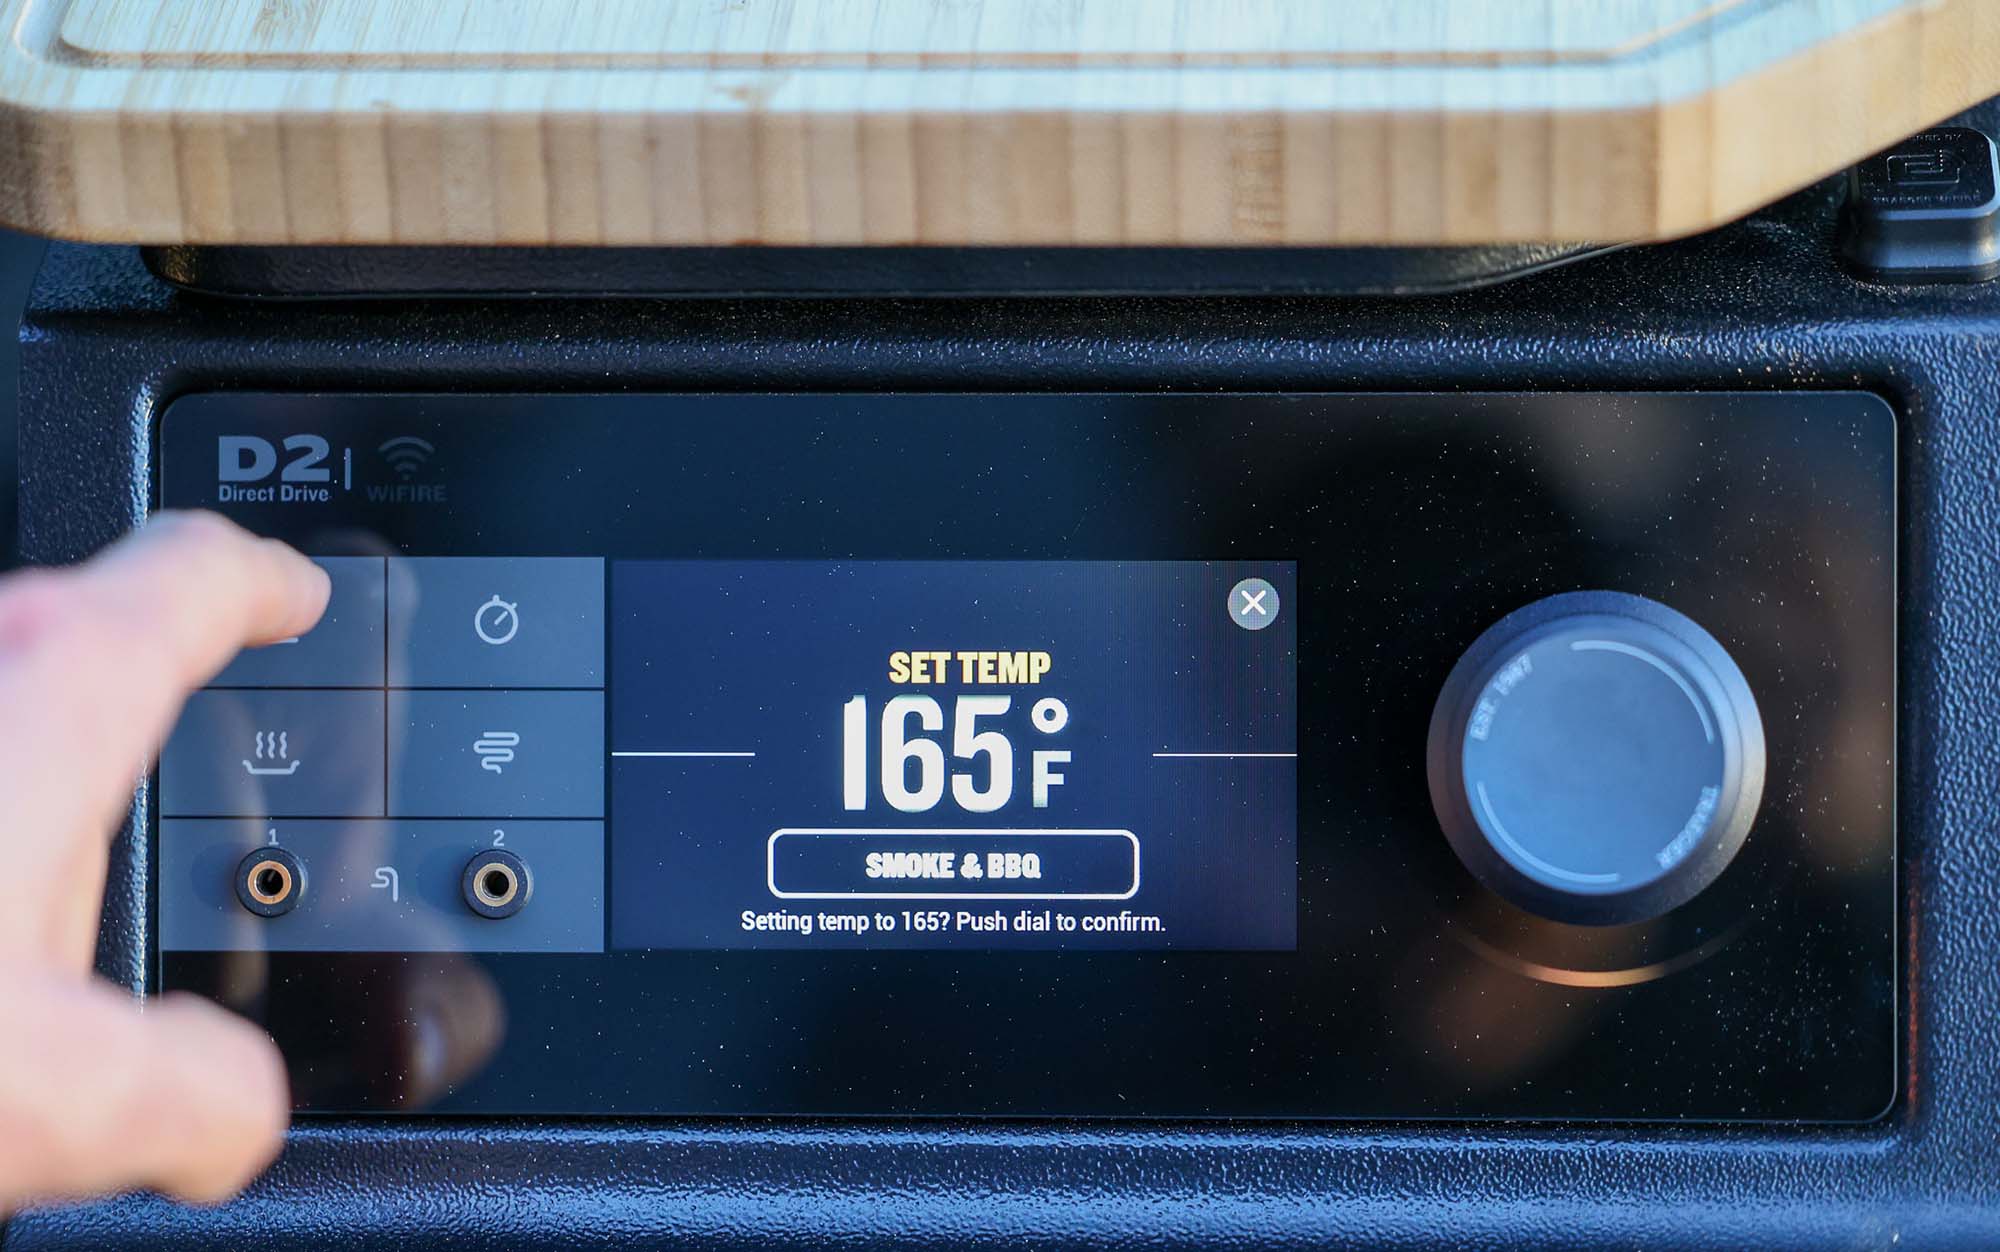 The Timberline features a touchscreen control panel.